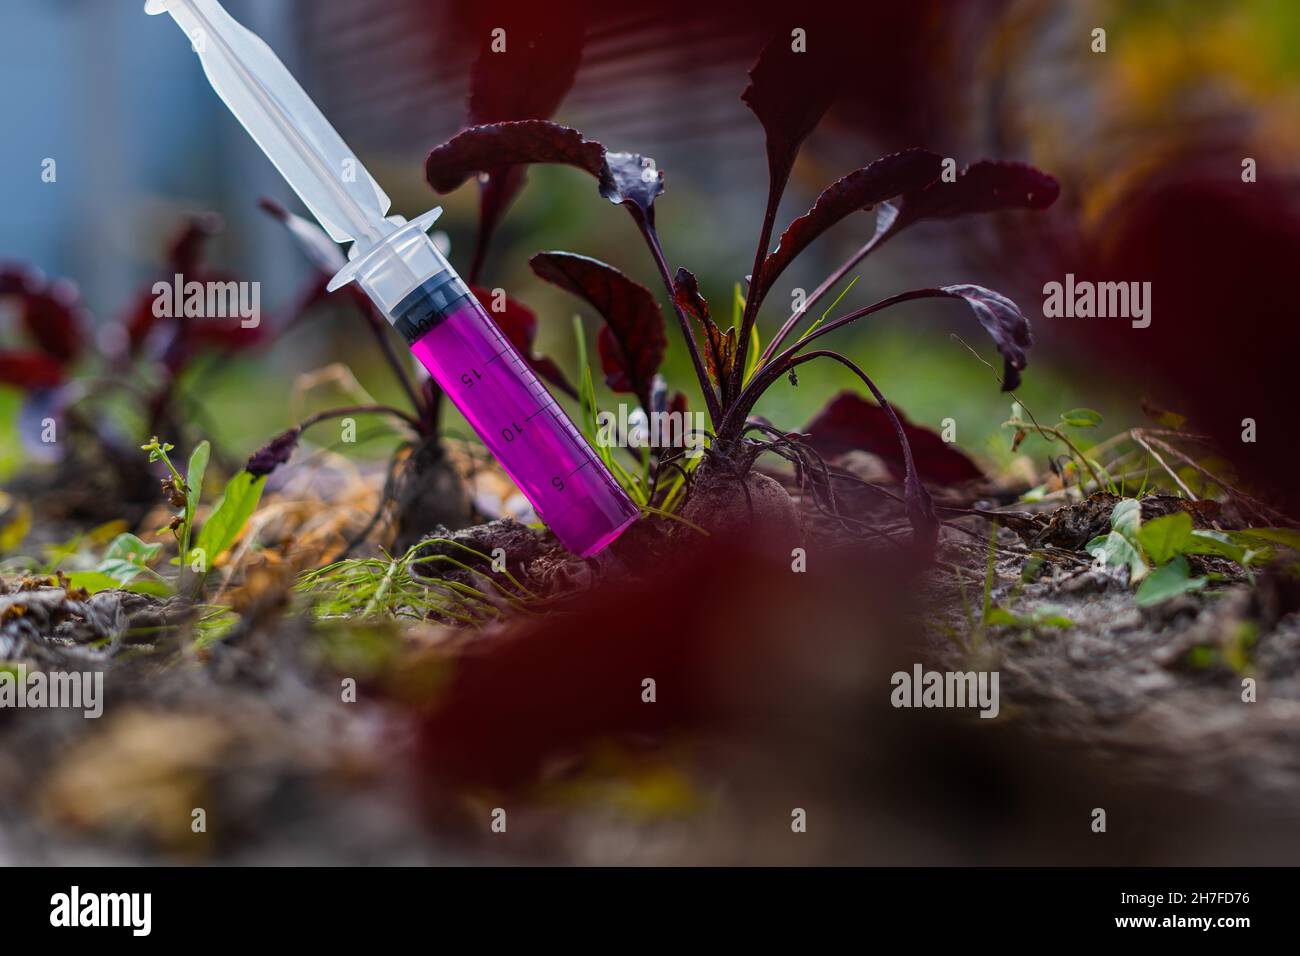 Pumping beets growing in the ground on the garden bed with solution for rapid growth Stock Photo